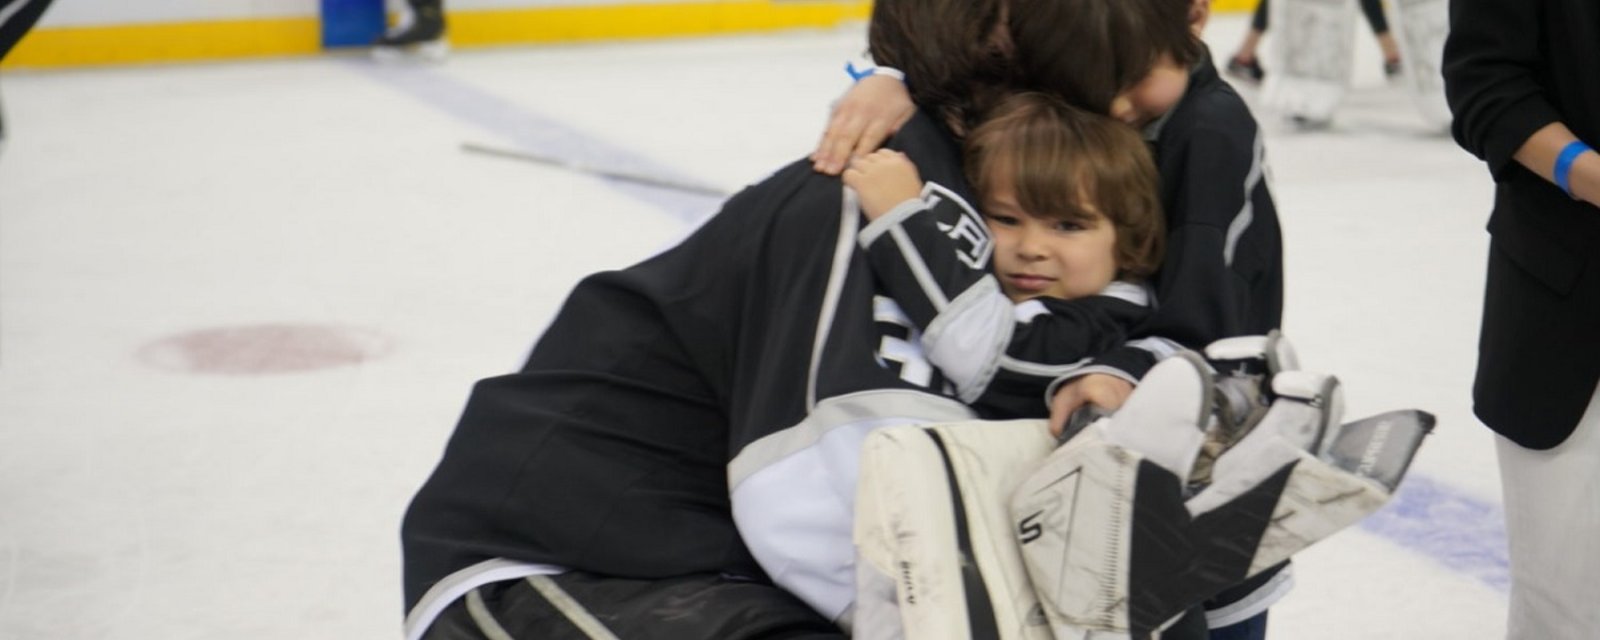 NHL goalie embraced by his family on the ice after what is likely his final game.